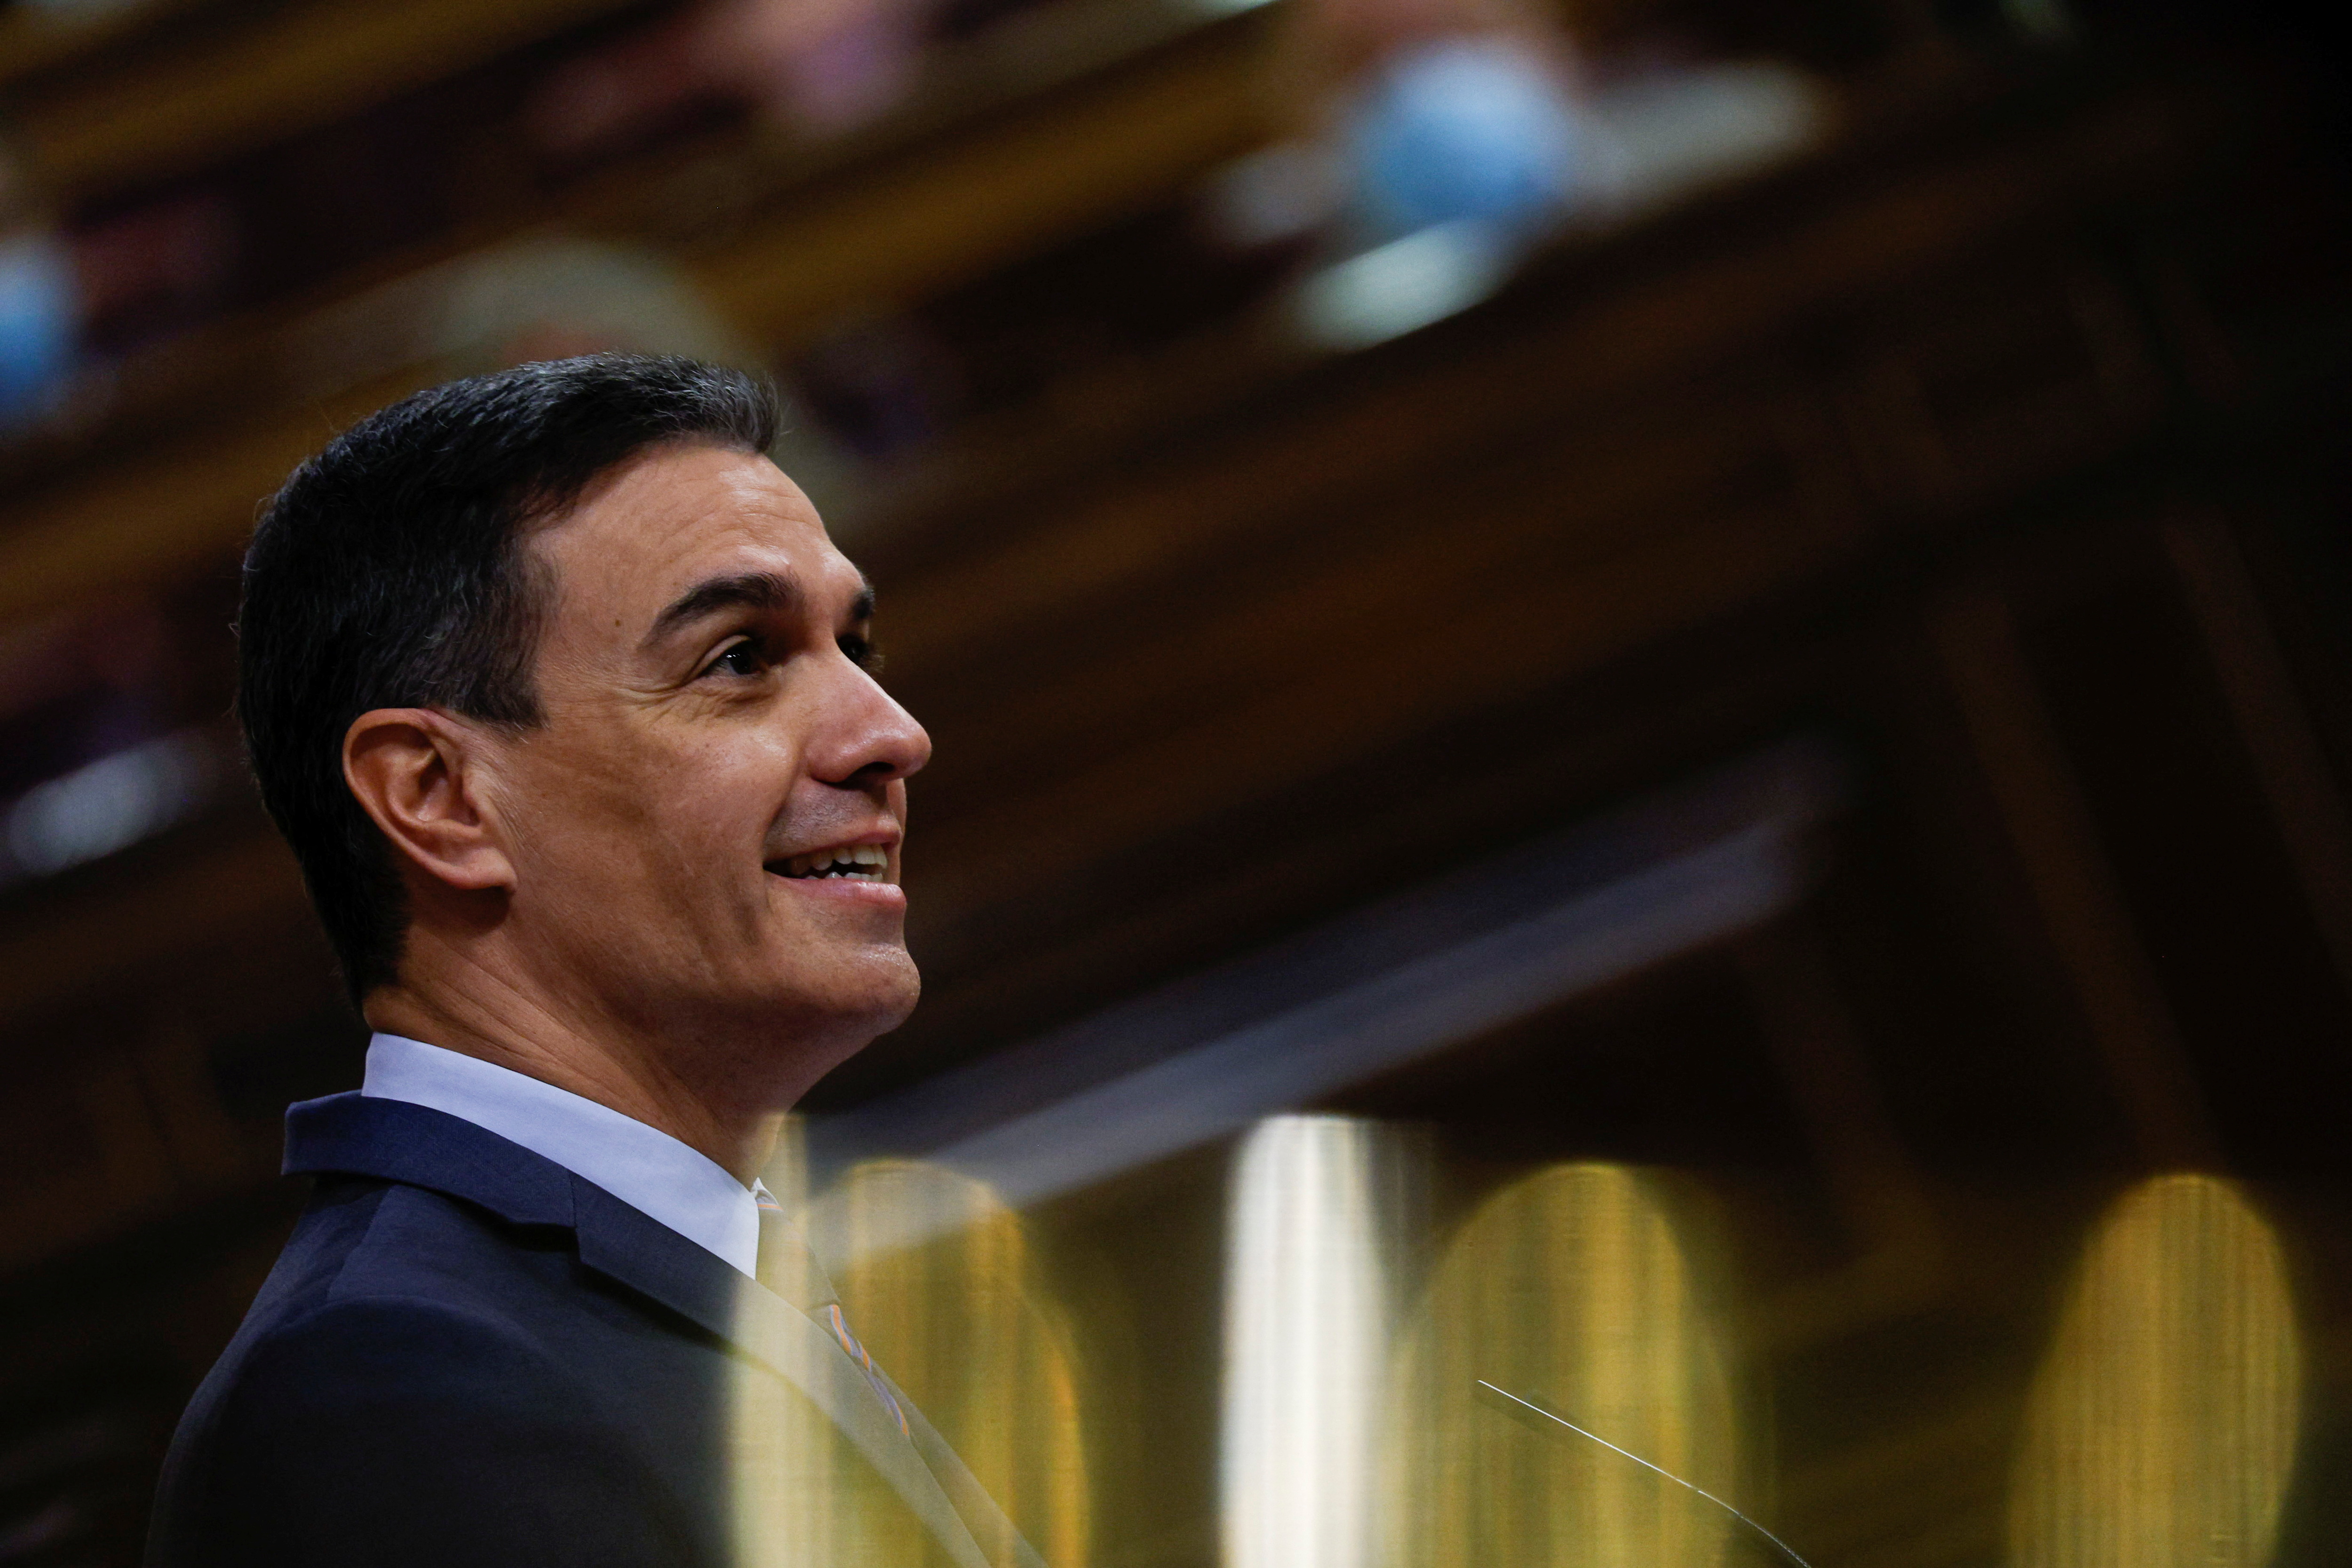 Spanish PM Sanchez speaks during a session at Parliament in Madrid